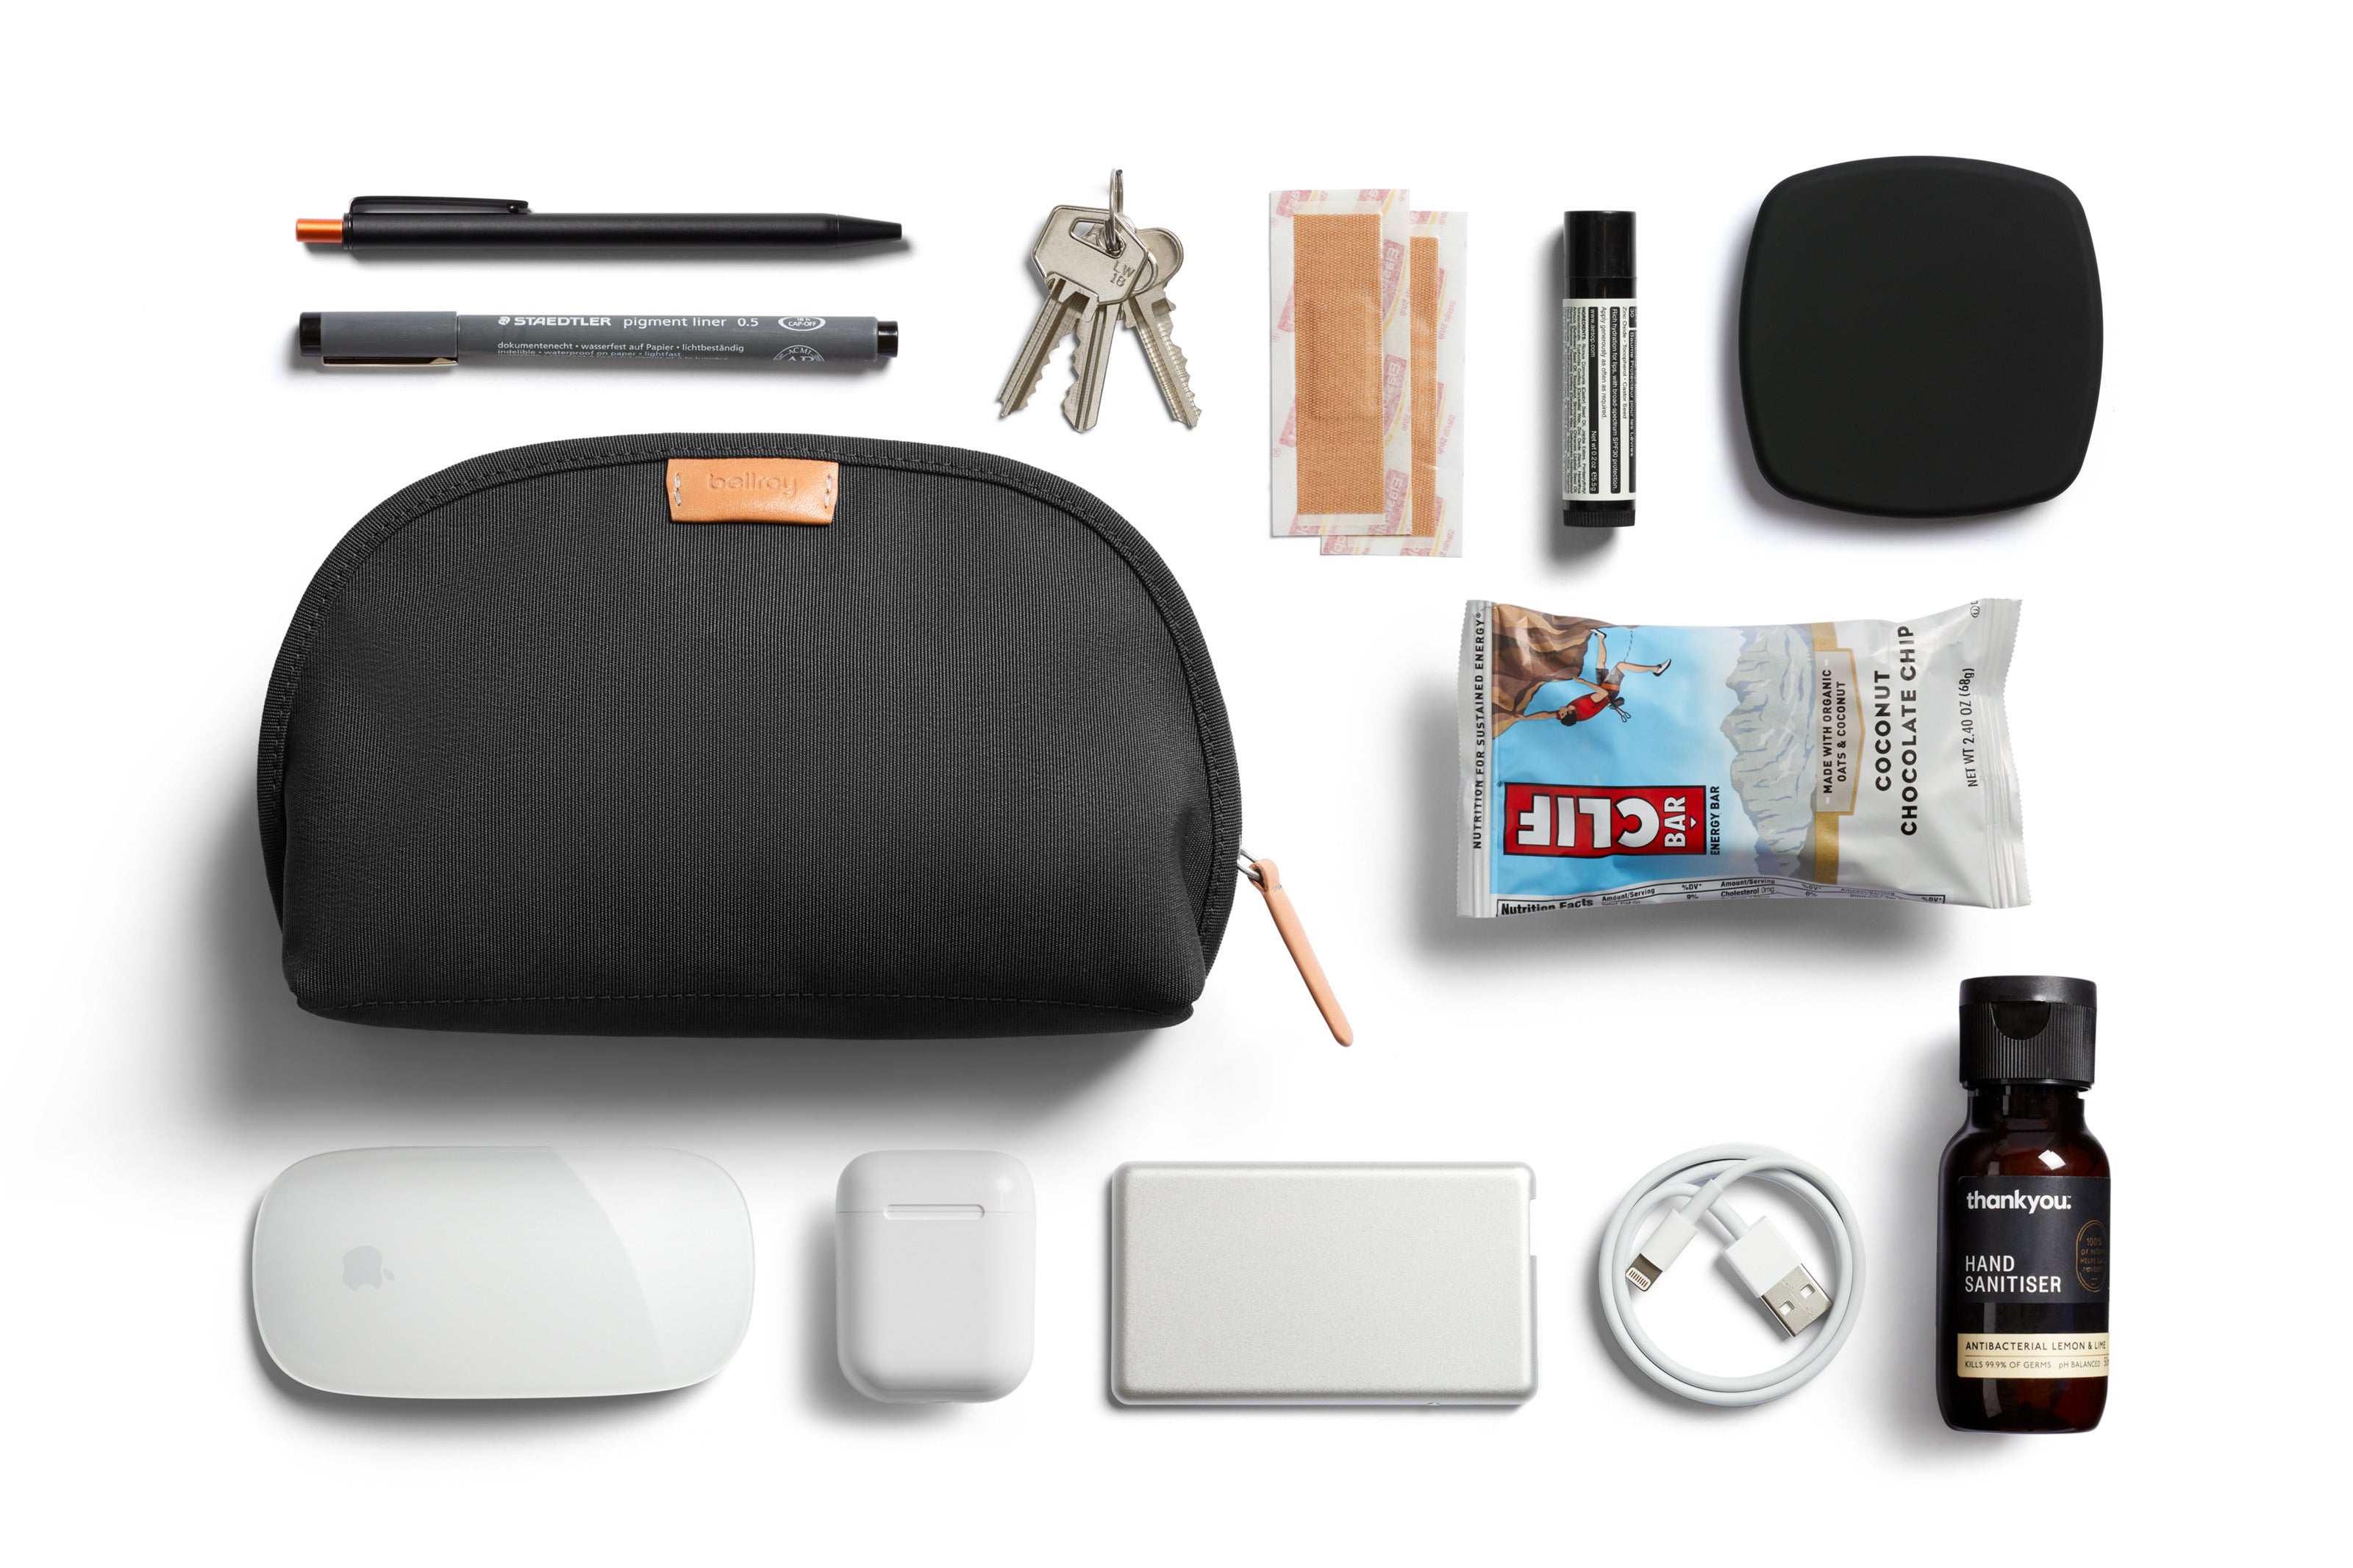 Bellroy Classic Pouch - Slate